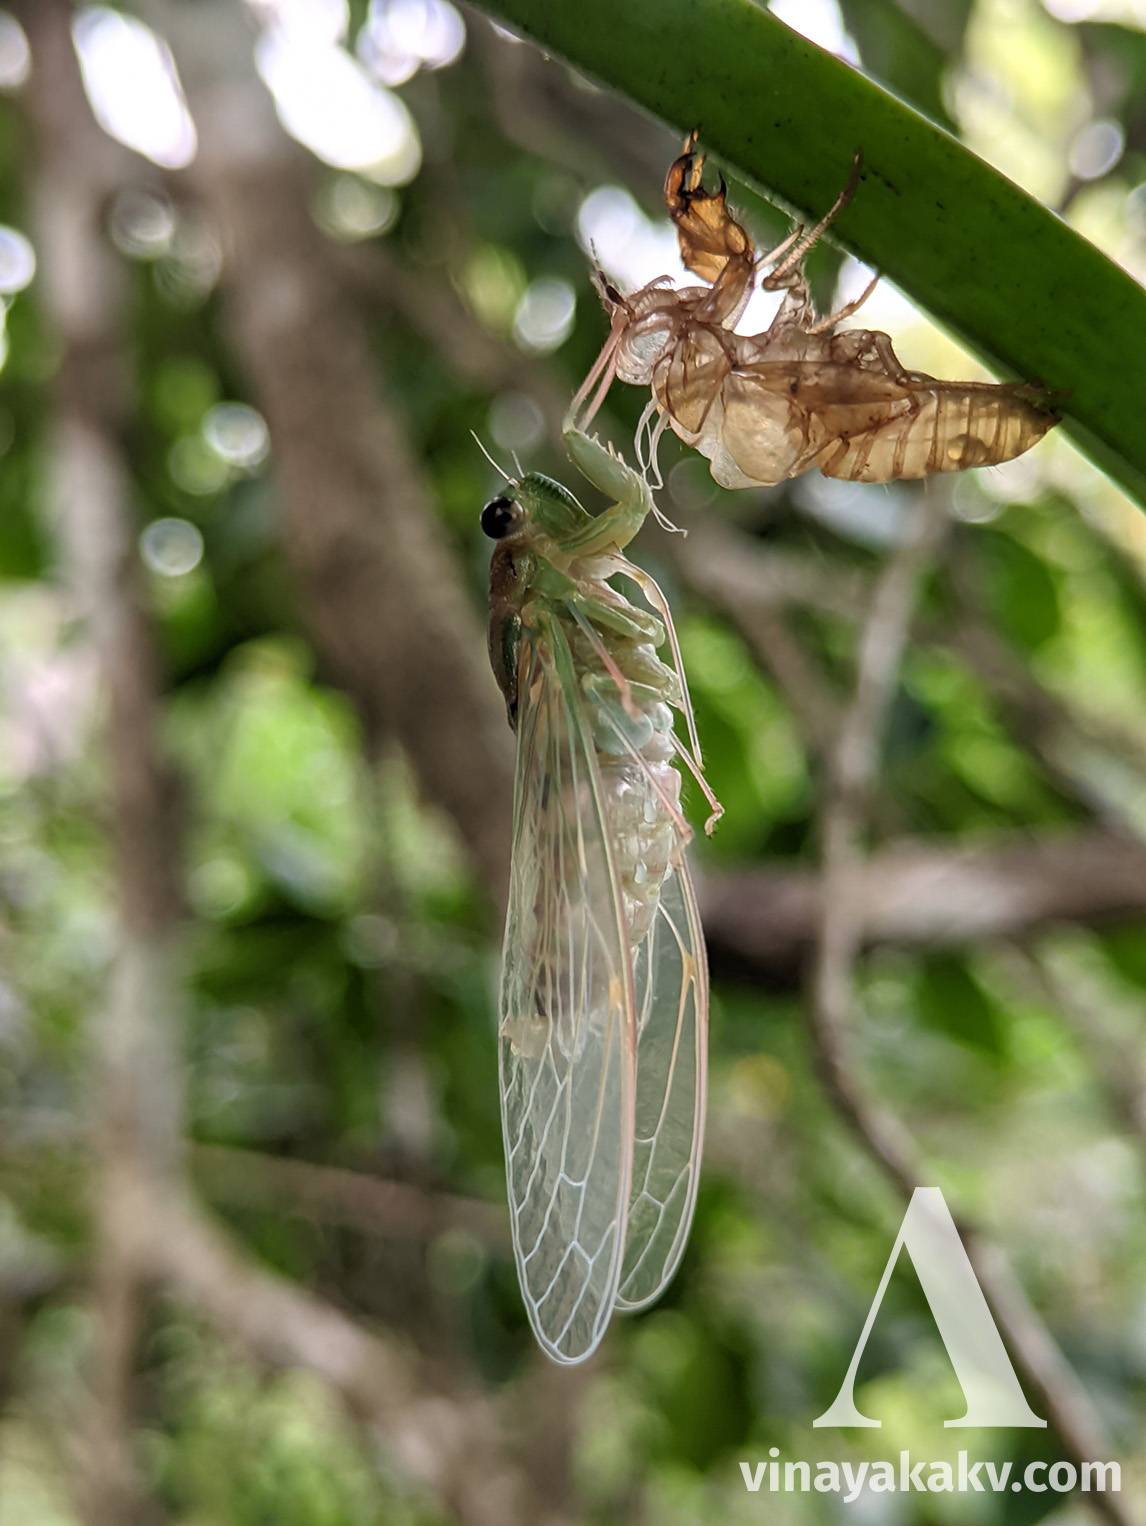 A cicada shedding its skin during the end of the summer rains, maybe preparing itself for the Monsoon